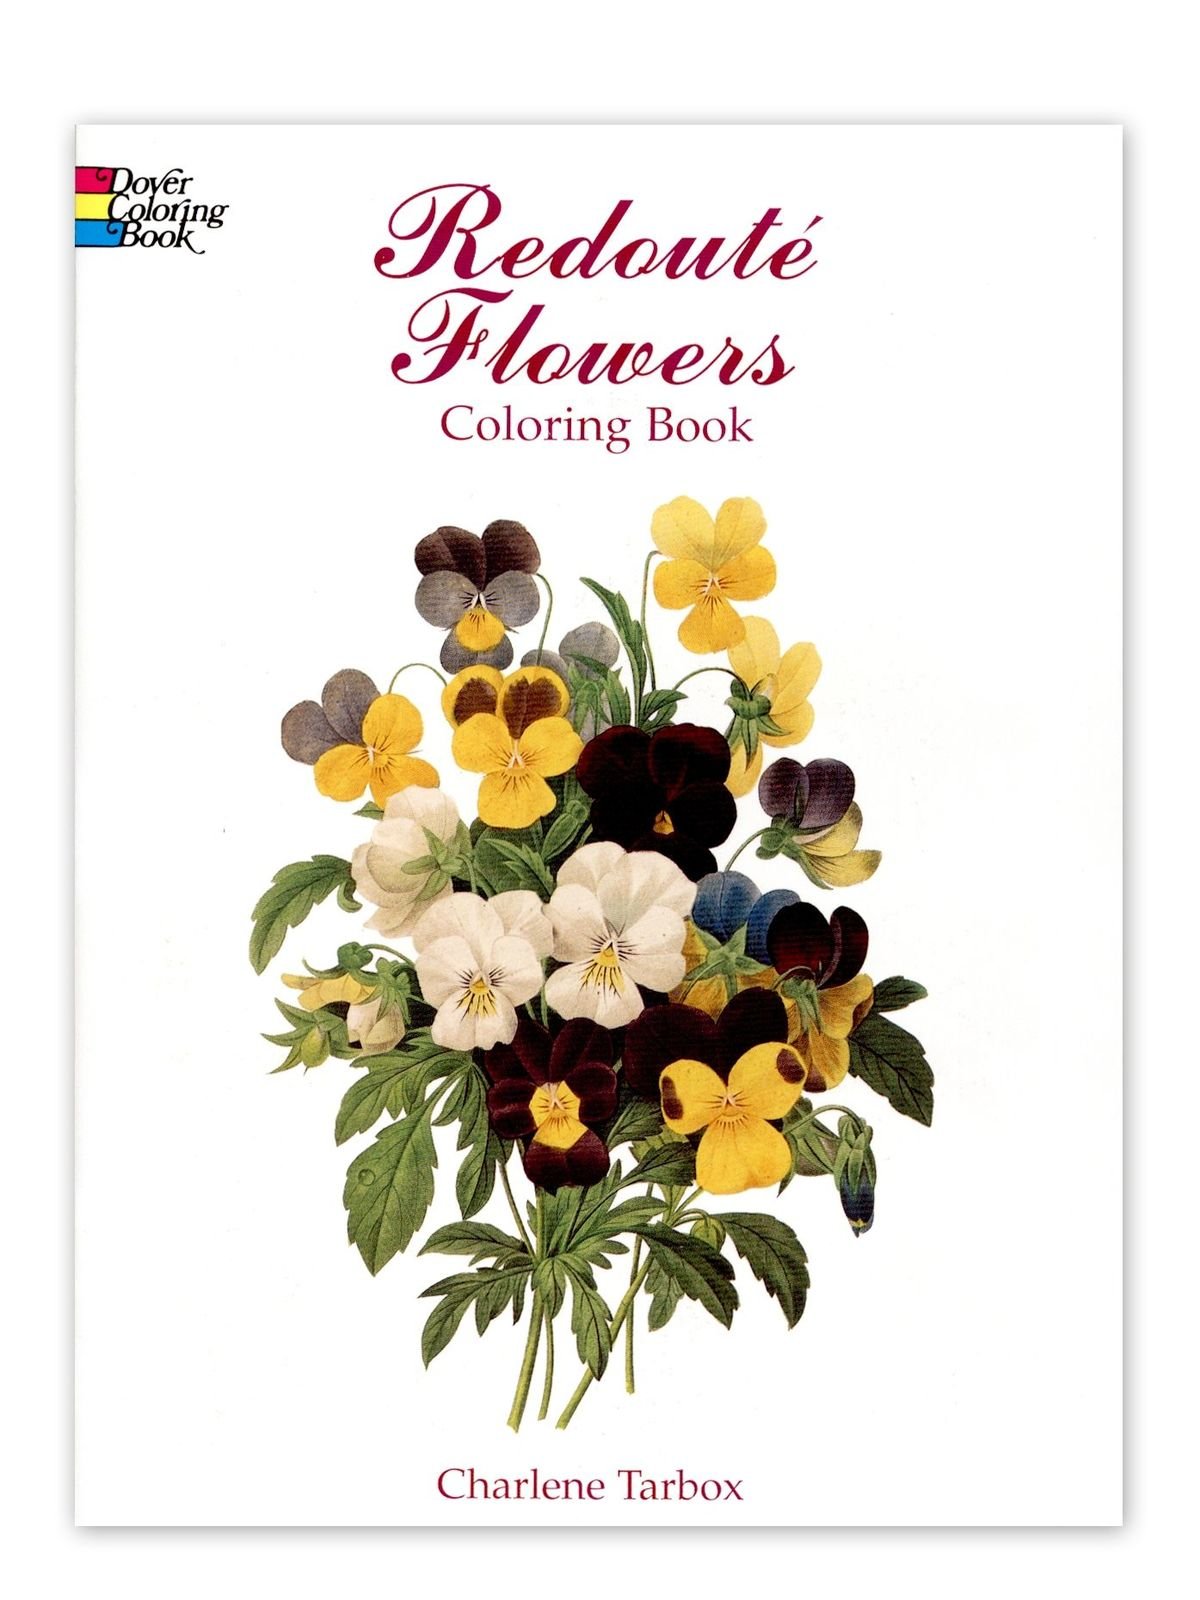 RedoutÉ Flowers Coloring Book